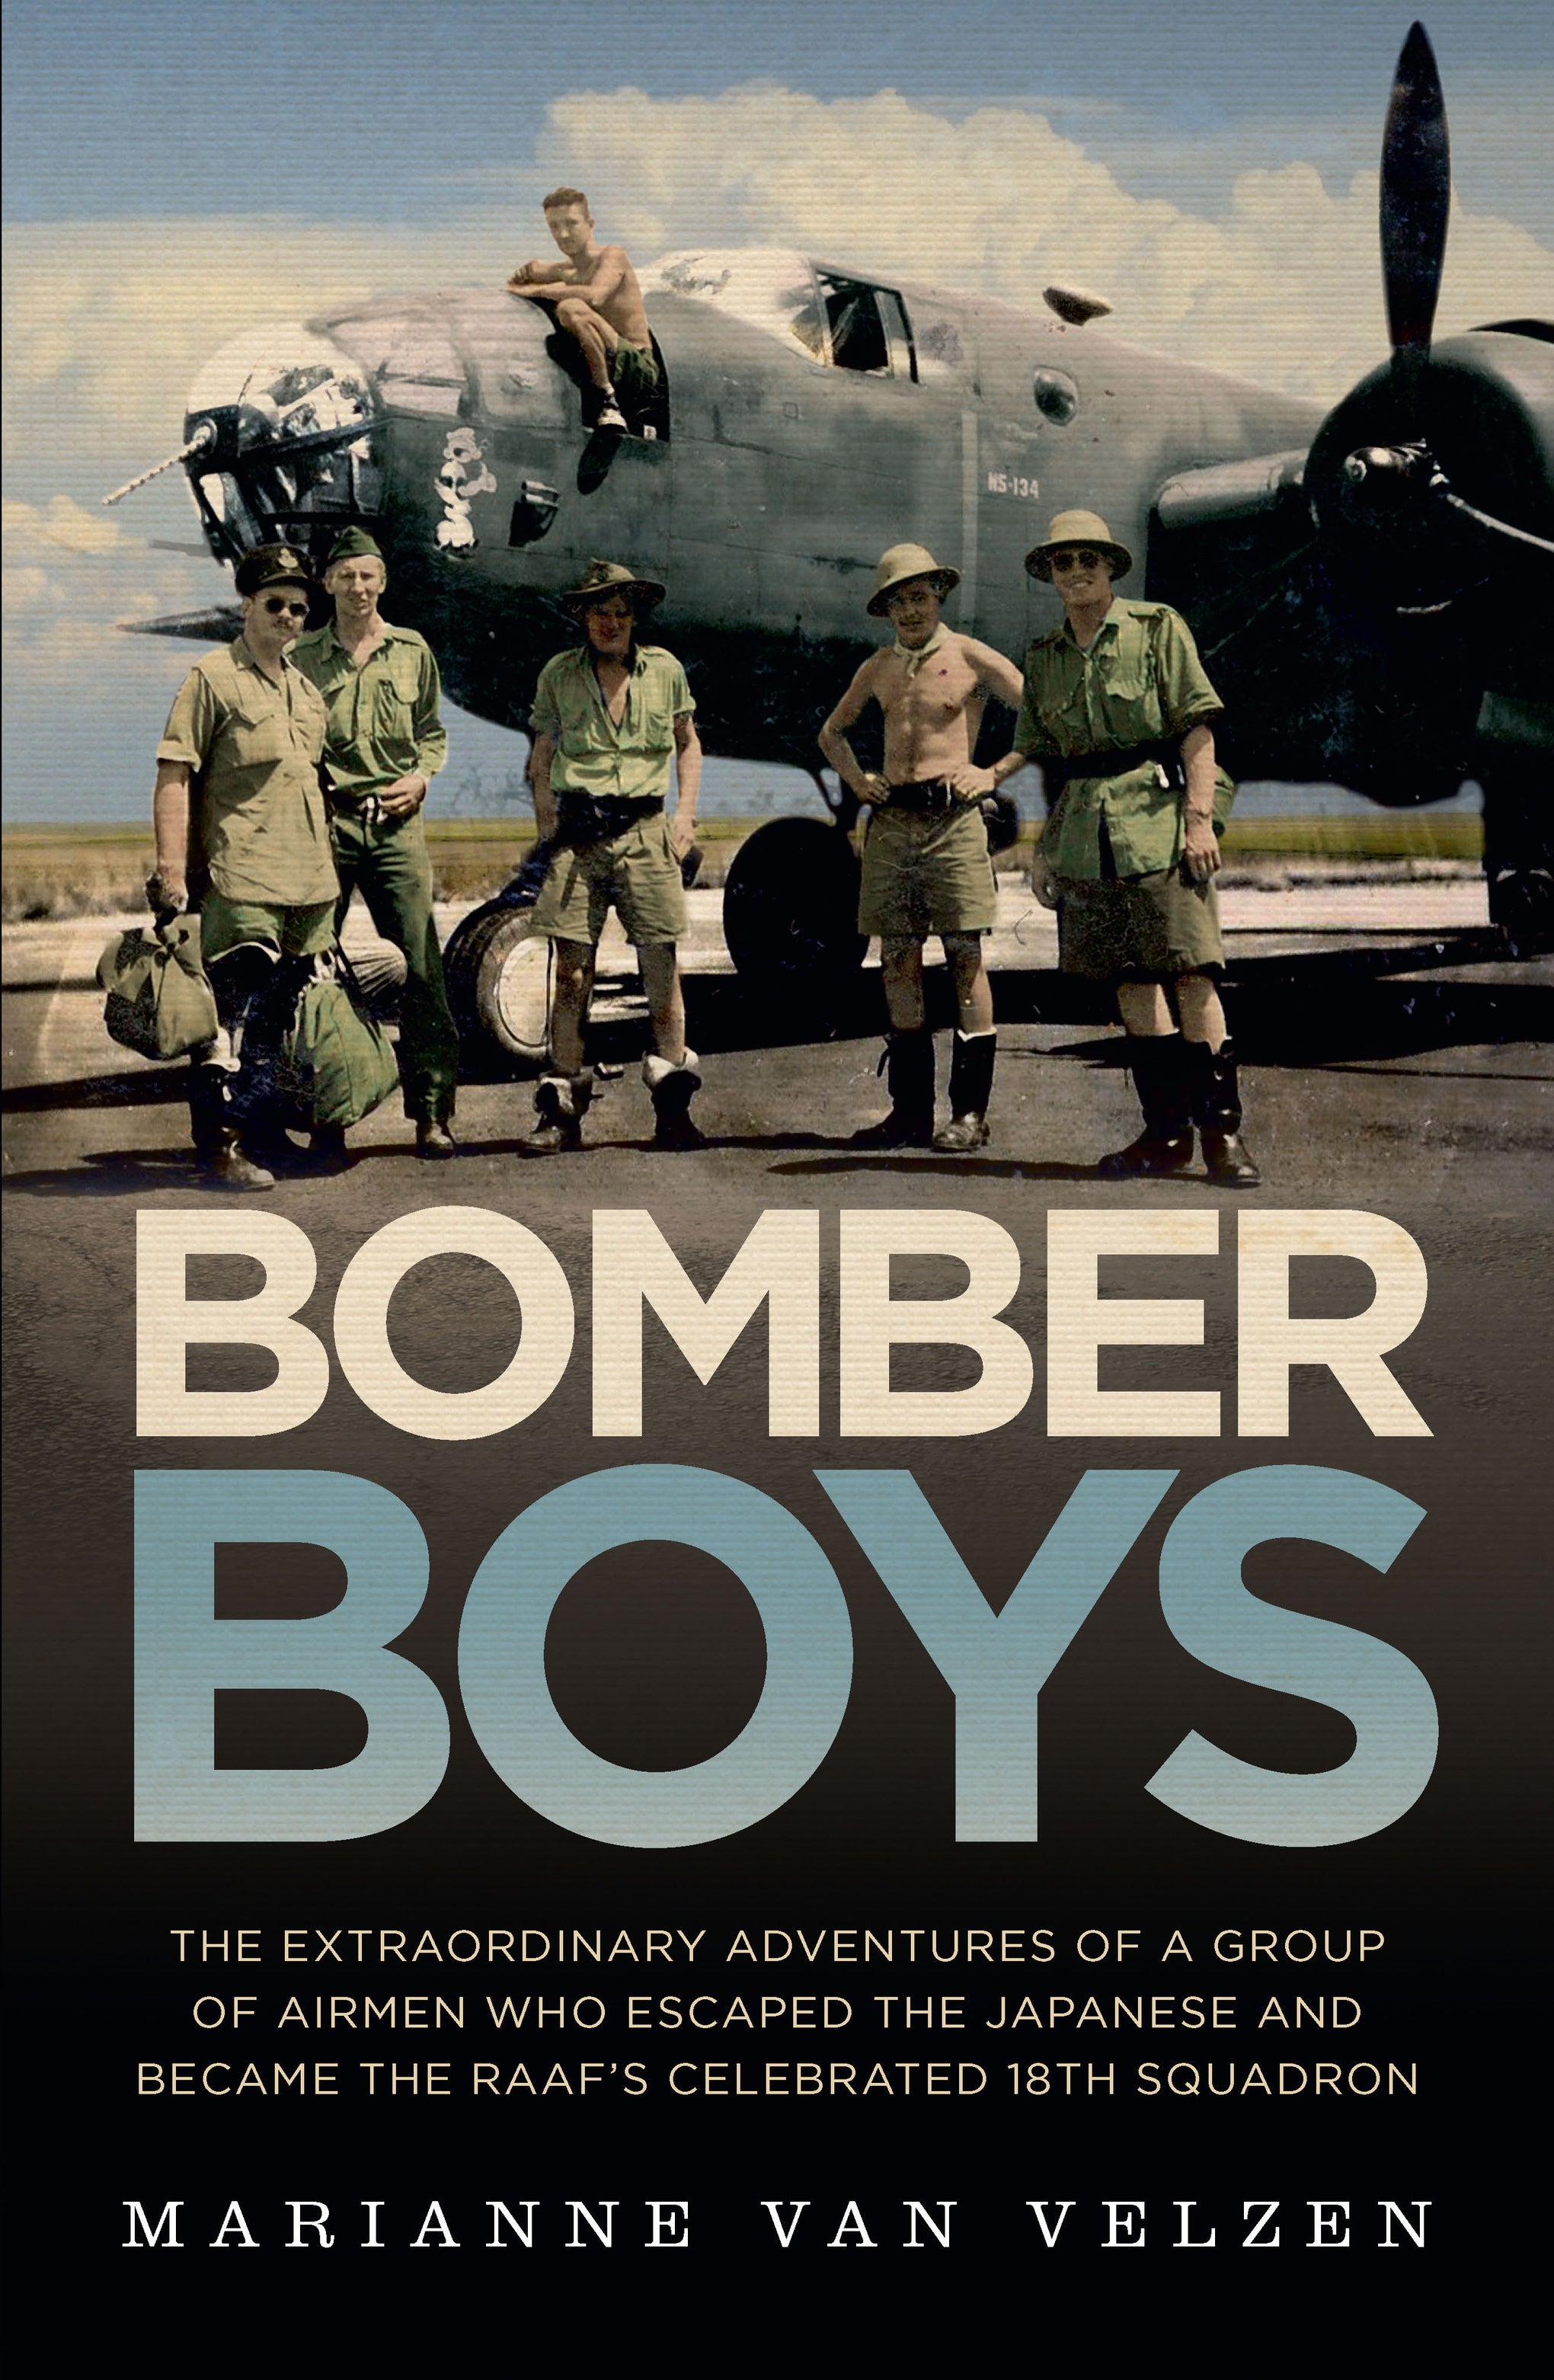 Bomber Boys: The Extraordinary Adventures of a Group of Airmen Who Escaped the Japanese and Became the RAAF’s Celebrated 18th Squadron